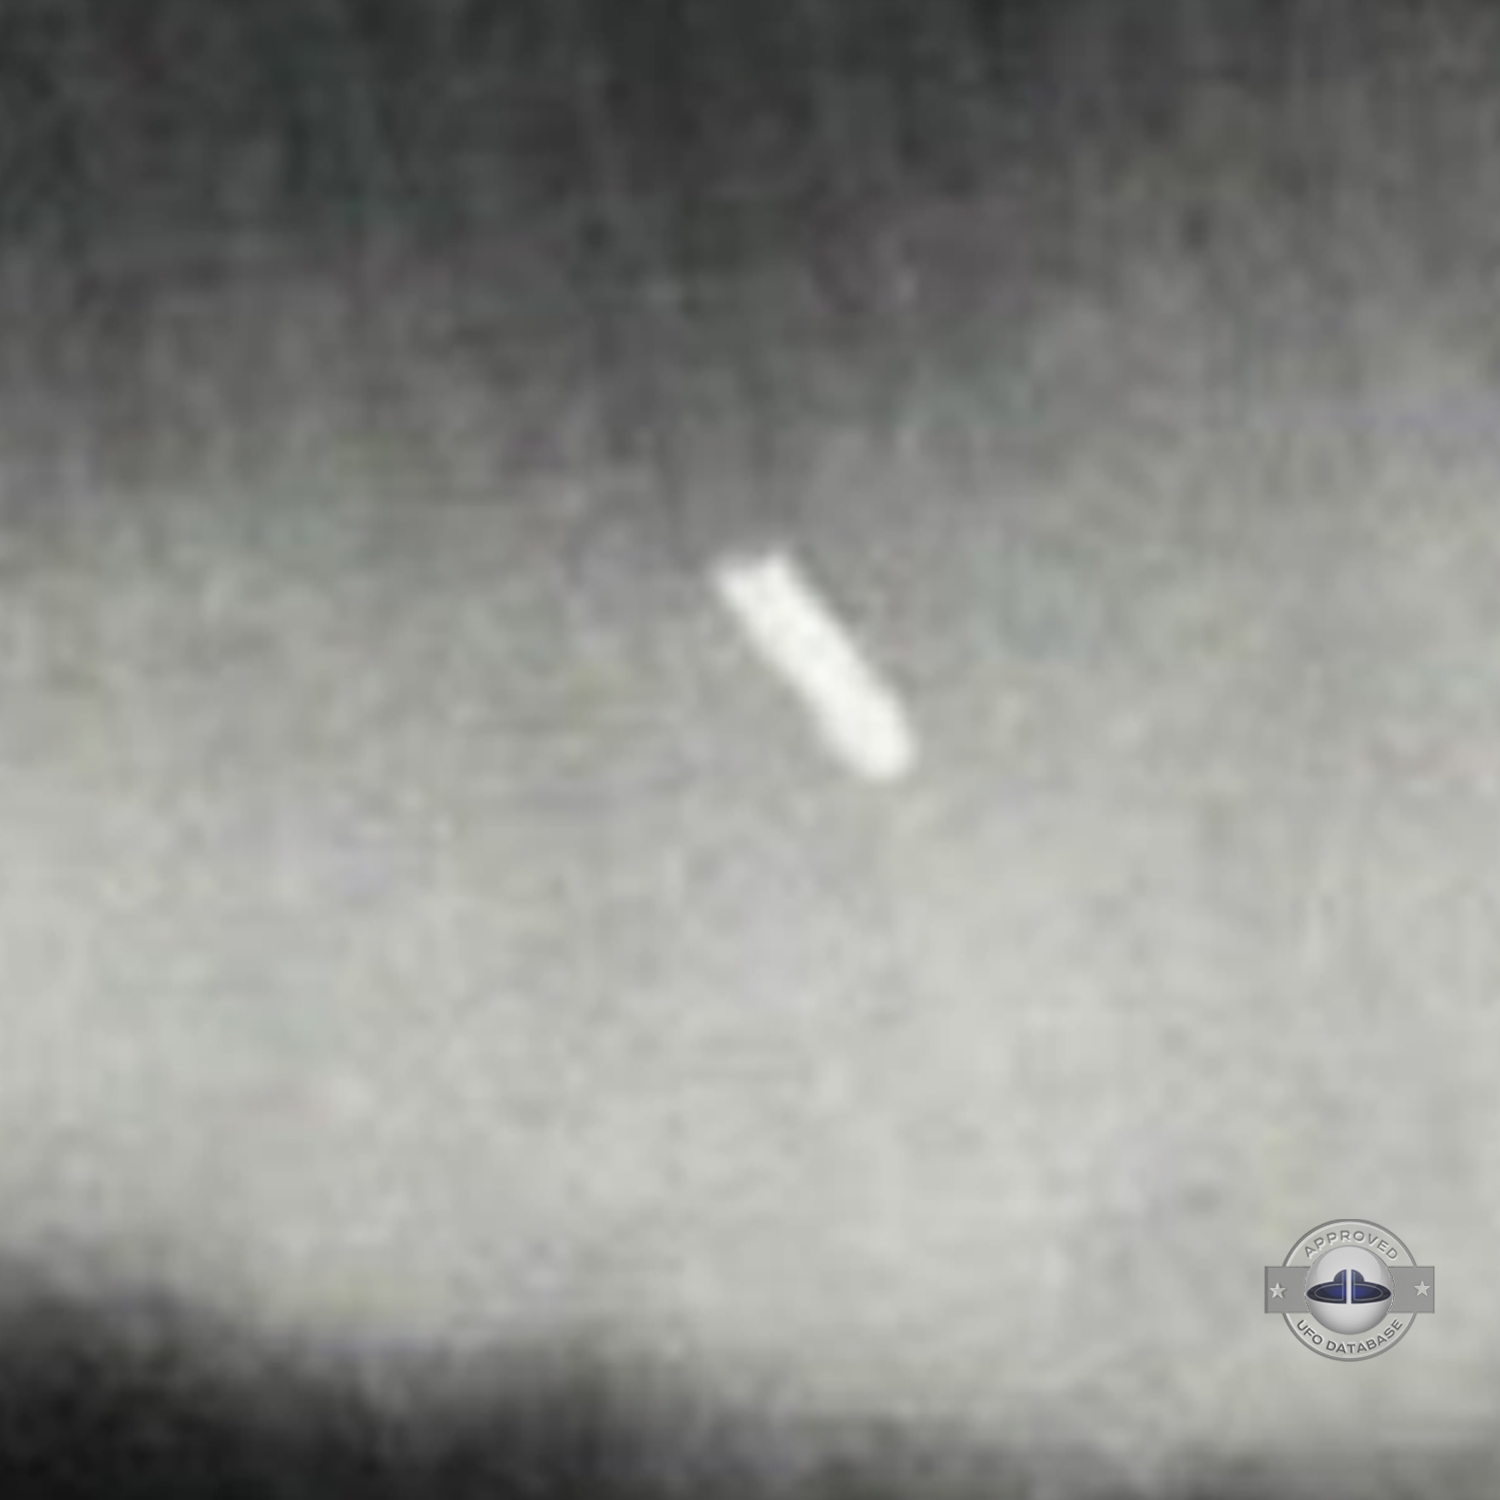 Tube shaped UFO - We can see the black hole at the end | New York UFO Picture #114-6